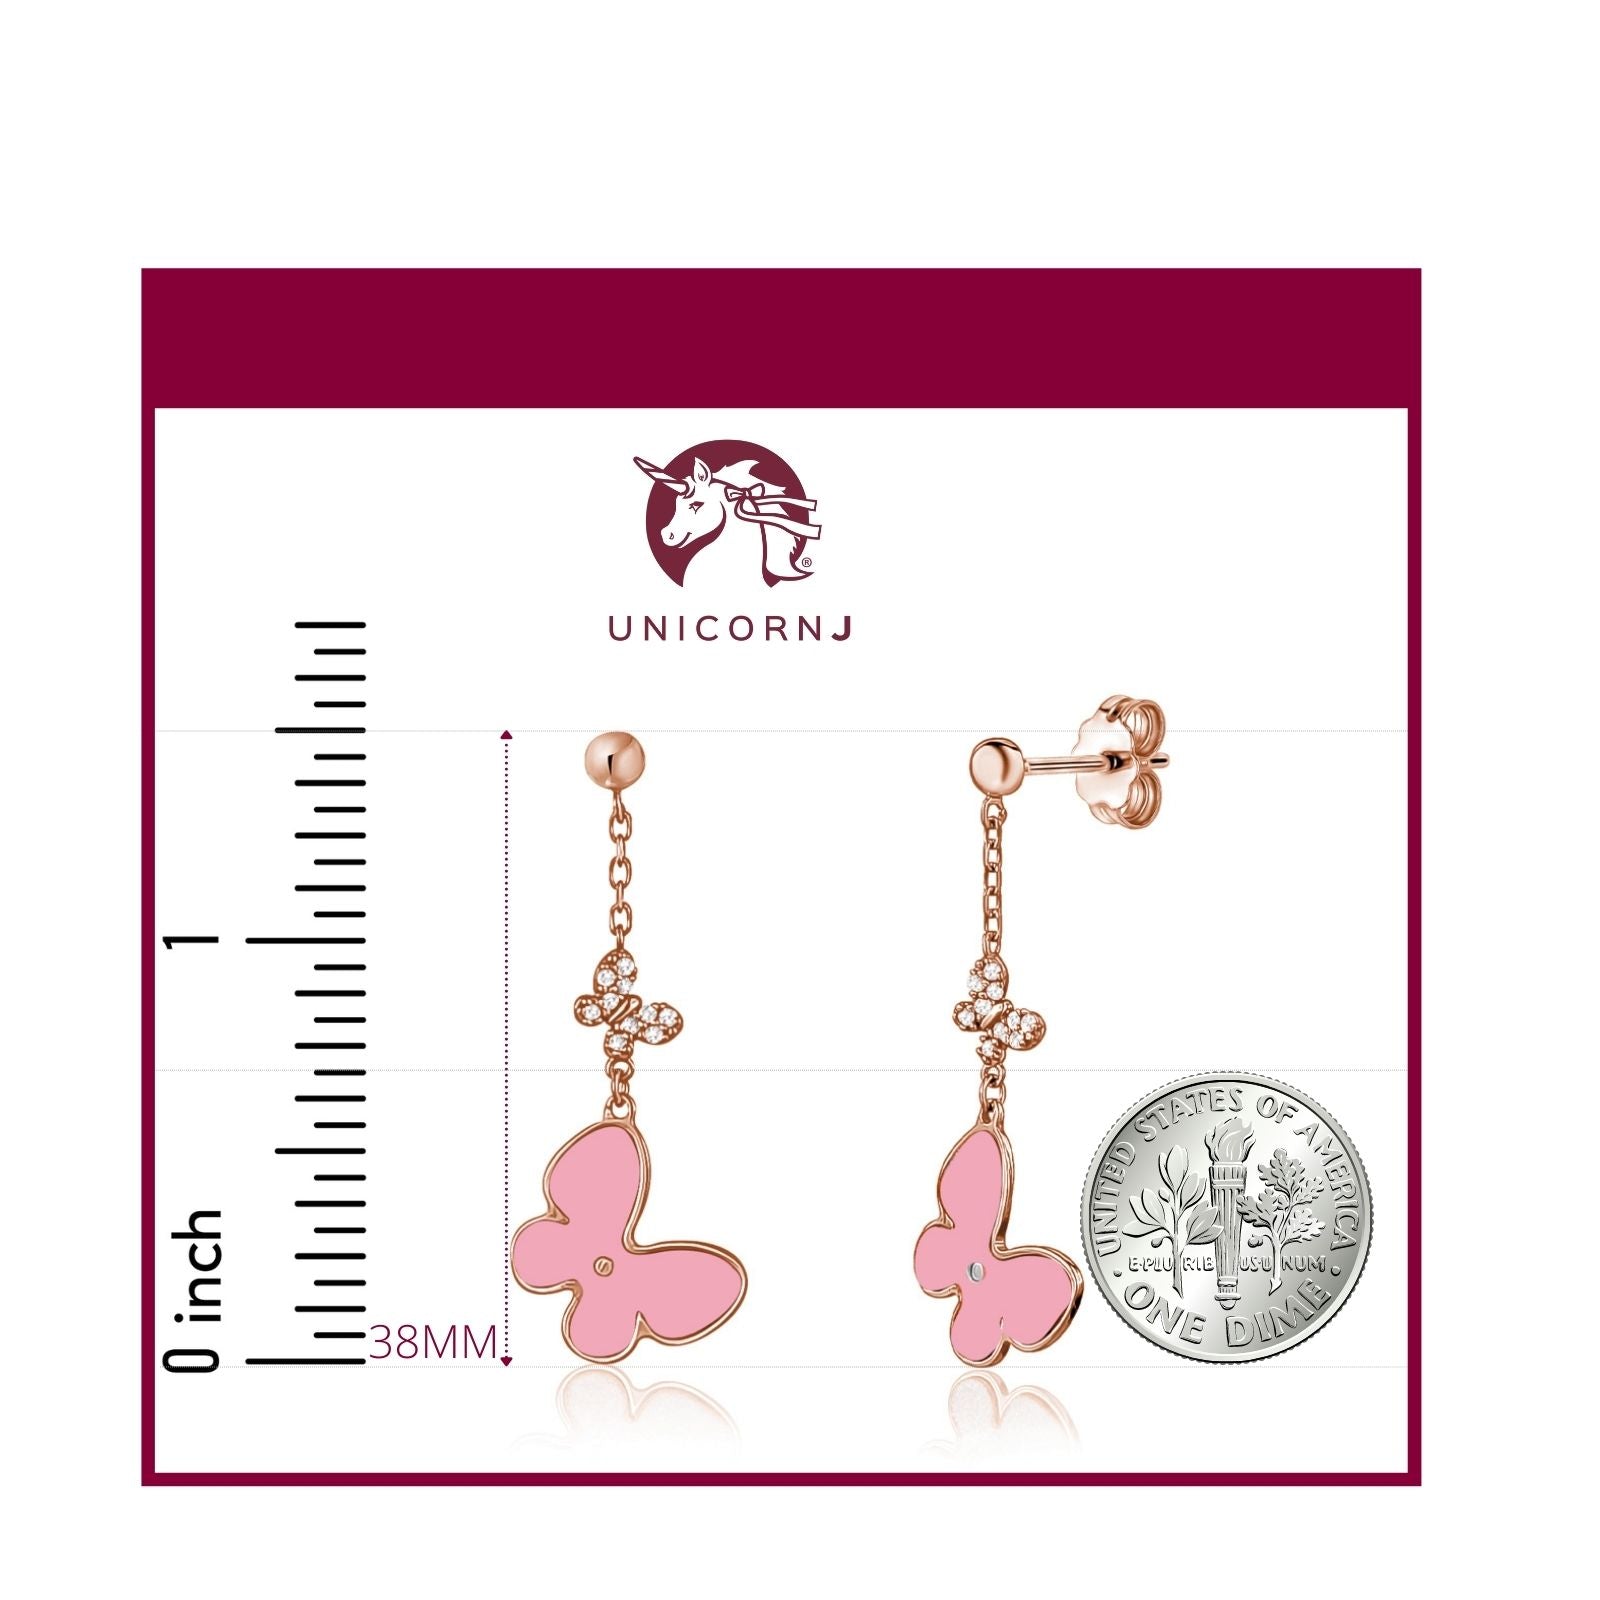 14K Rose Gold Butterfly Dangle Post Earrings with Pink Mother of Pearl and Simulated Diamonds Italy